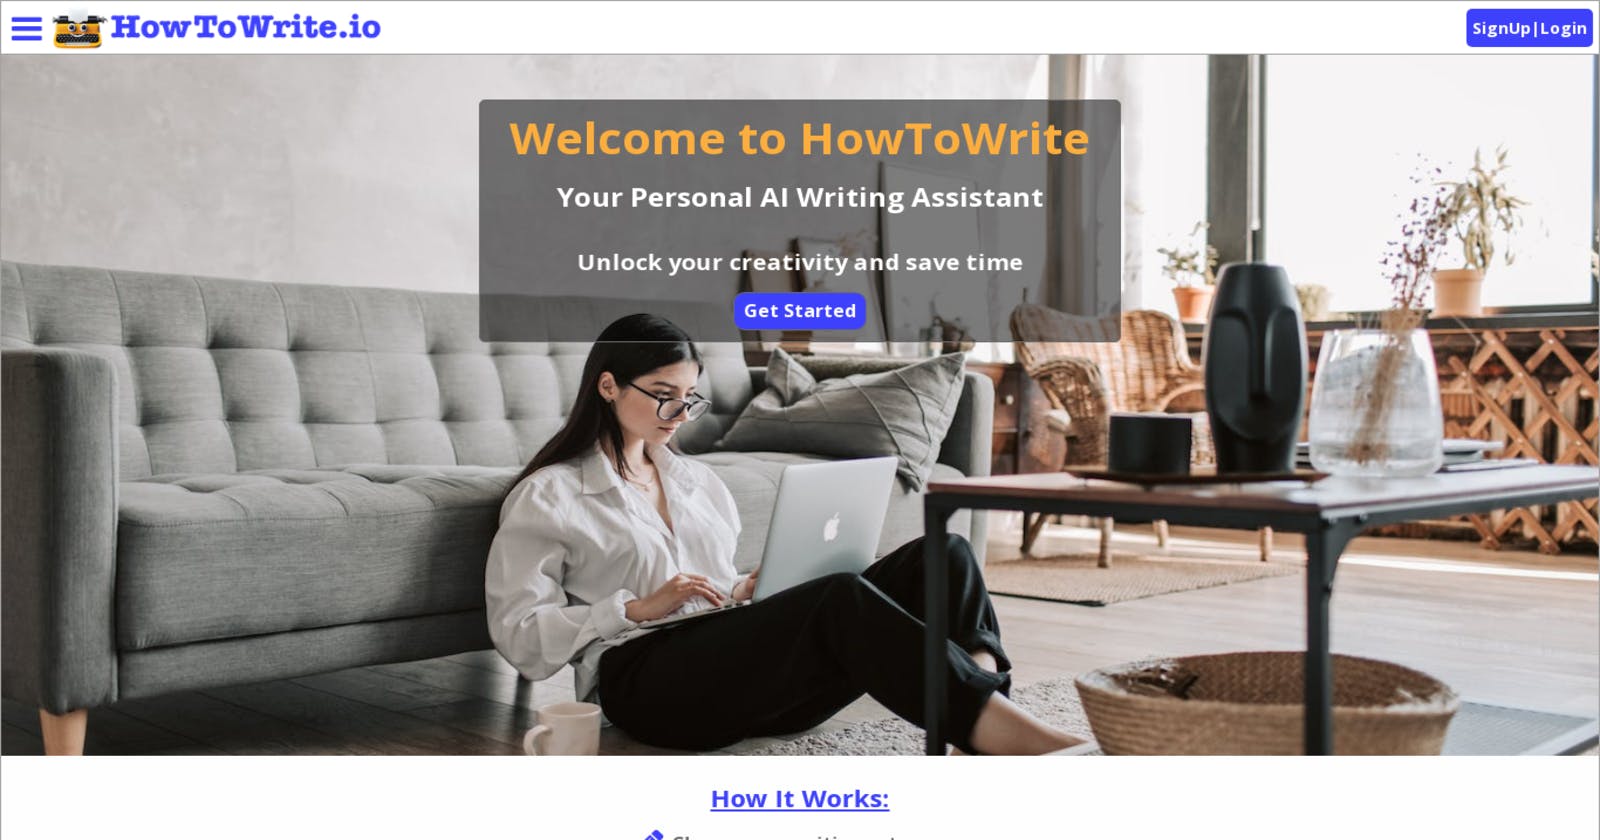 HowToWrite.io: Your AI-Powered Writing Assistant Revolutionizing the Writing Process